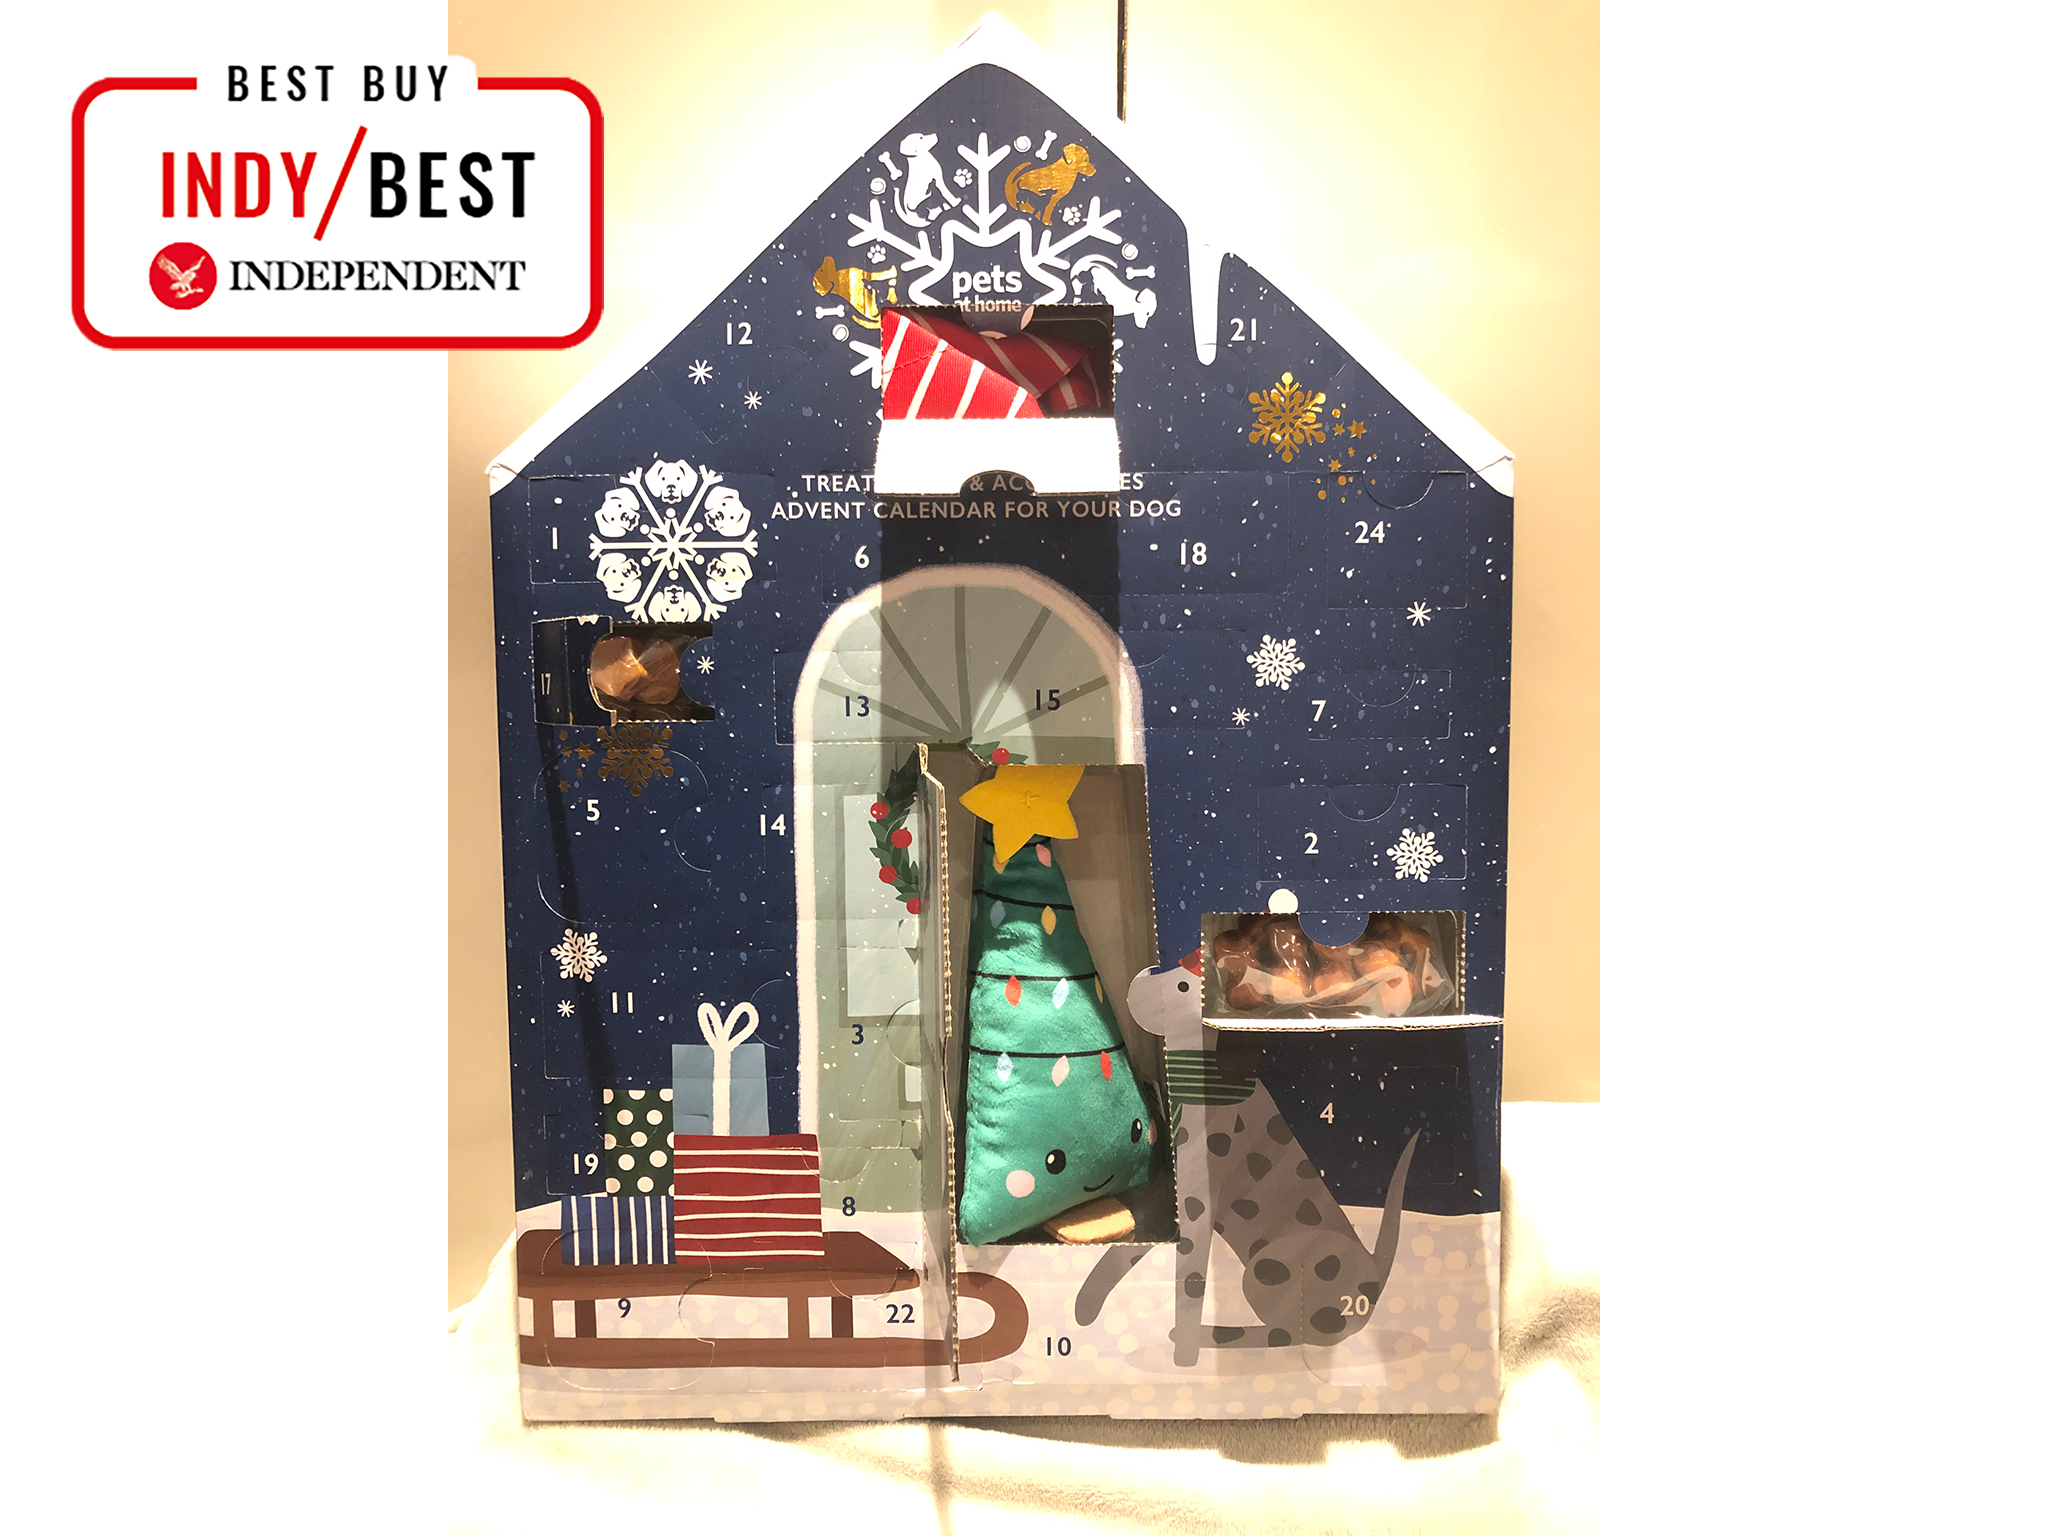 Pets At Home treats toys and accessories advent calendar